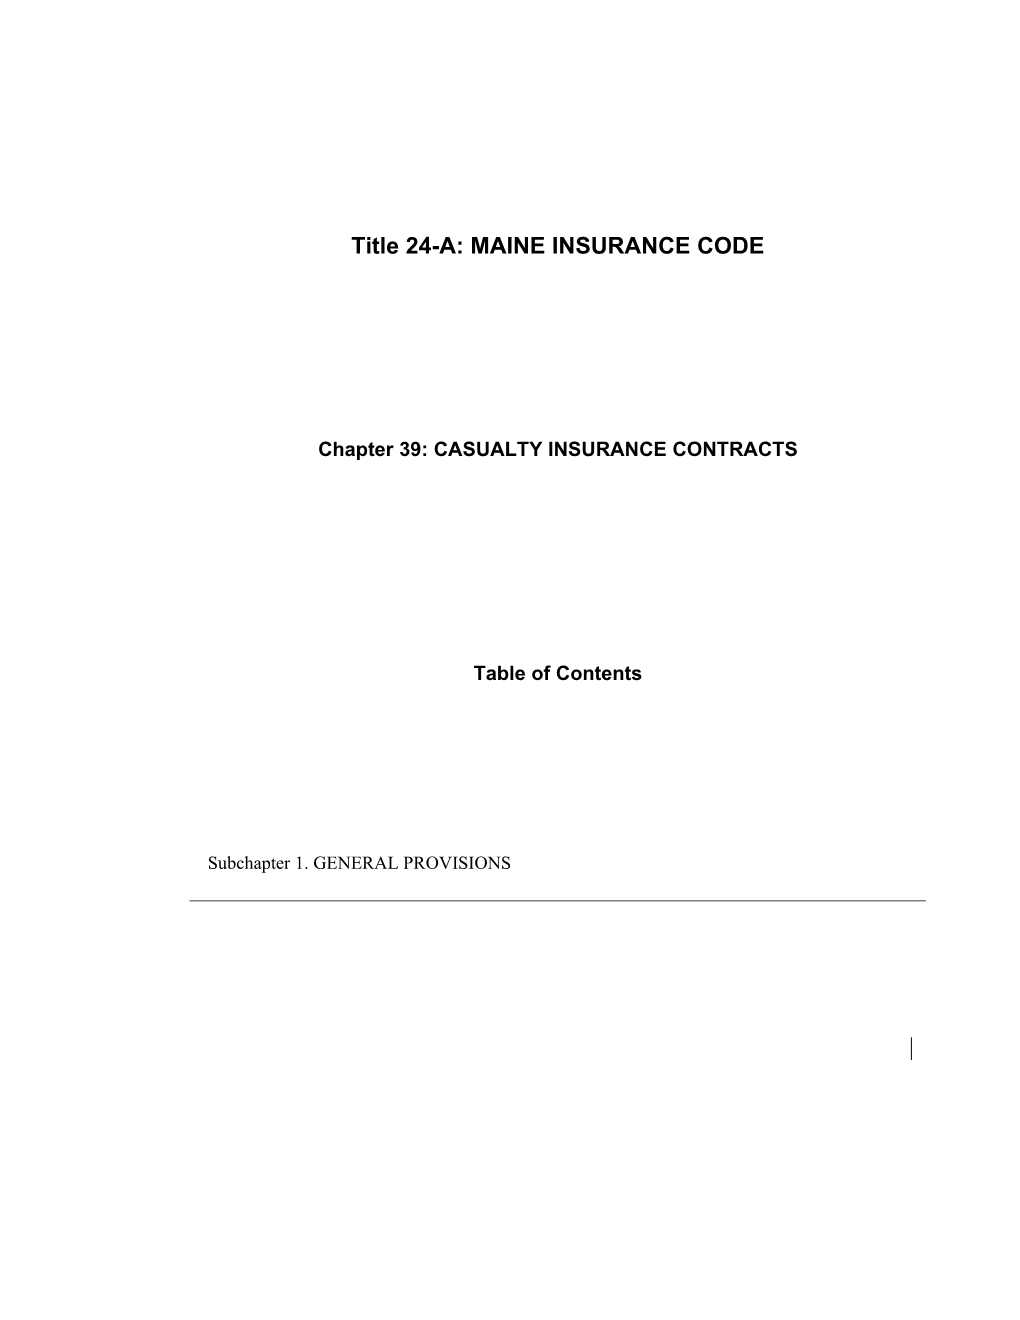 MRS Title 24-A, Chapter39: CASUALTY INSURANCE CONTRACTS